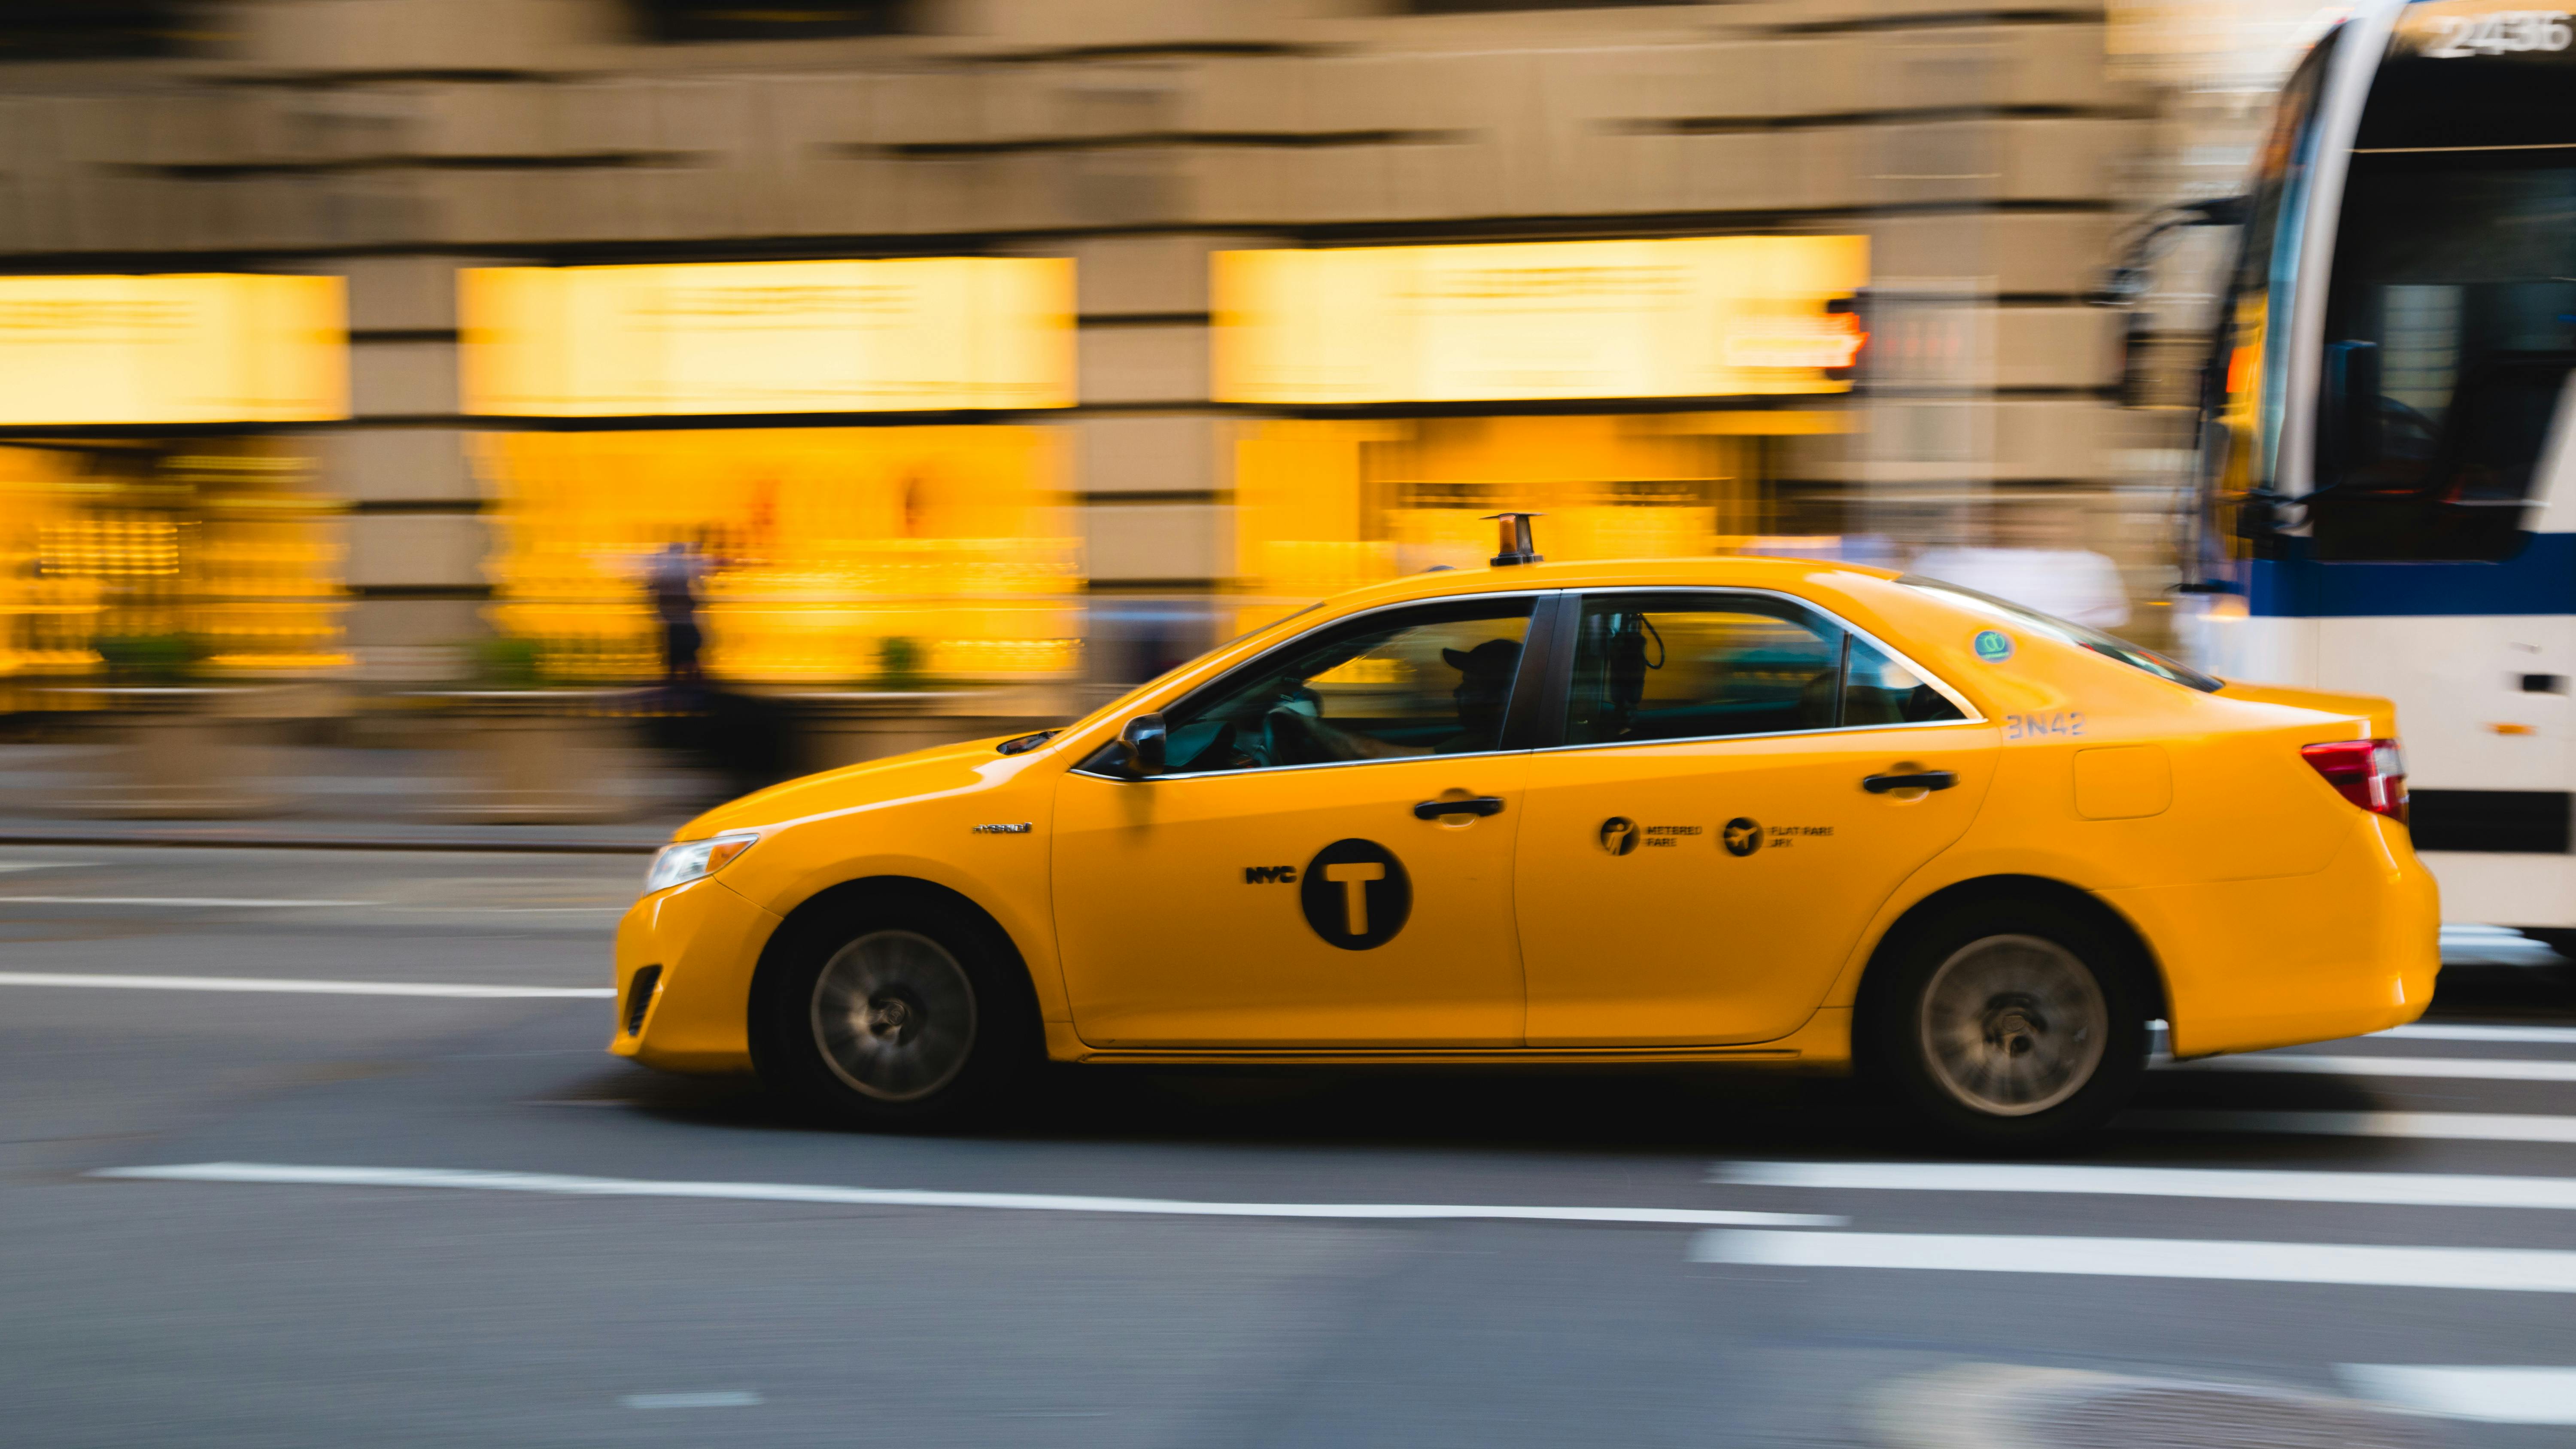 A yellow taxi driving | Source: Pexels